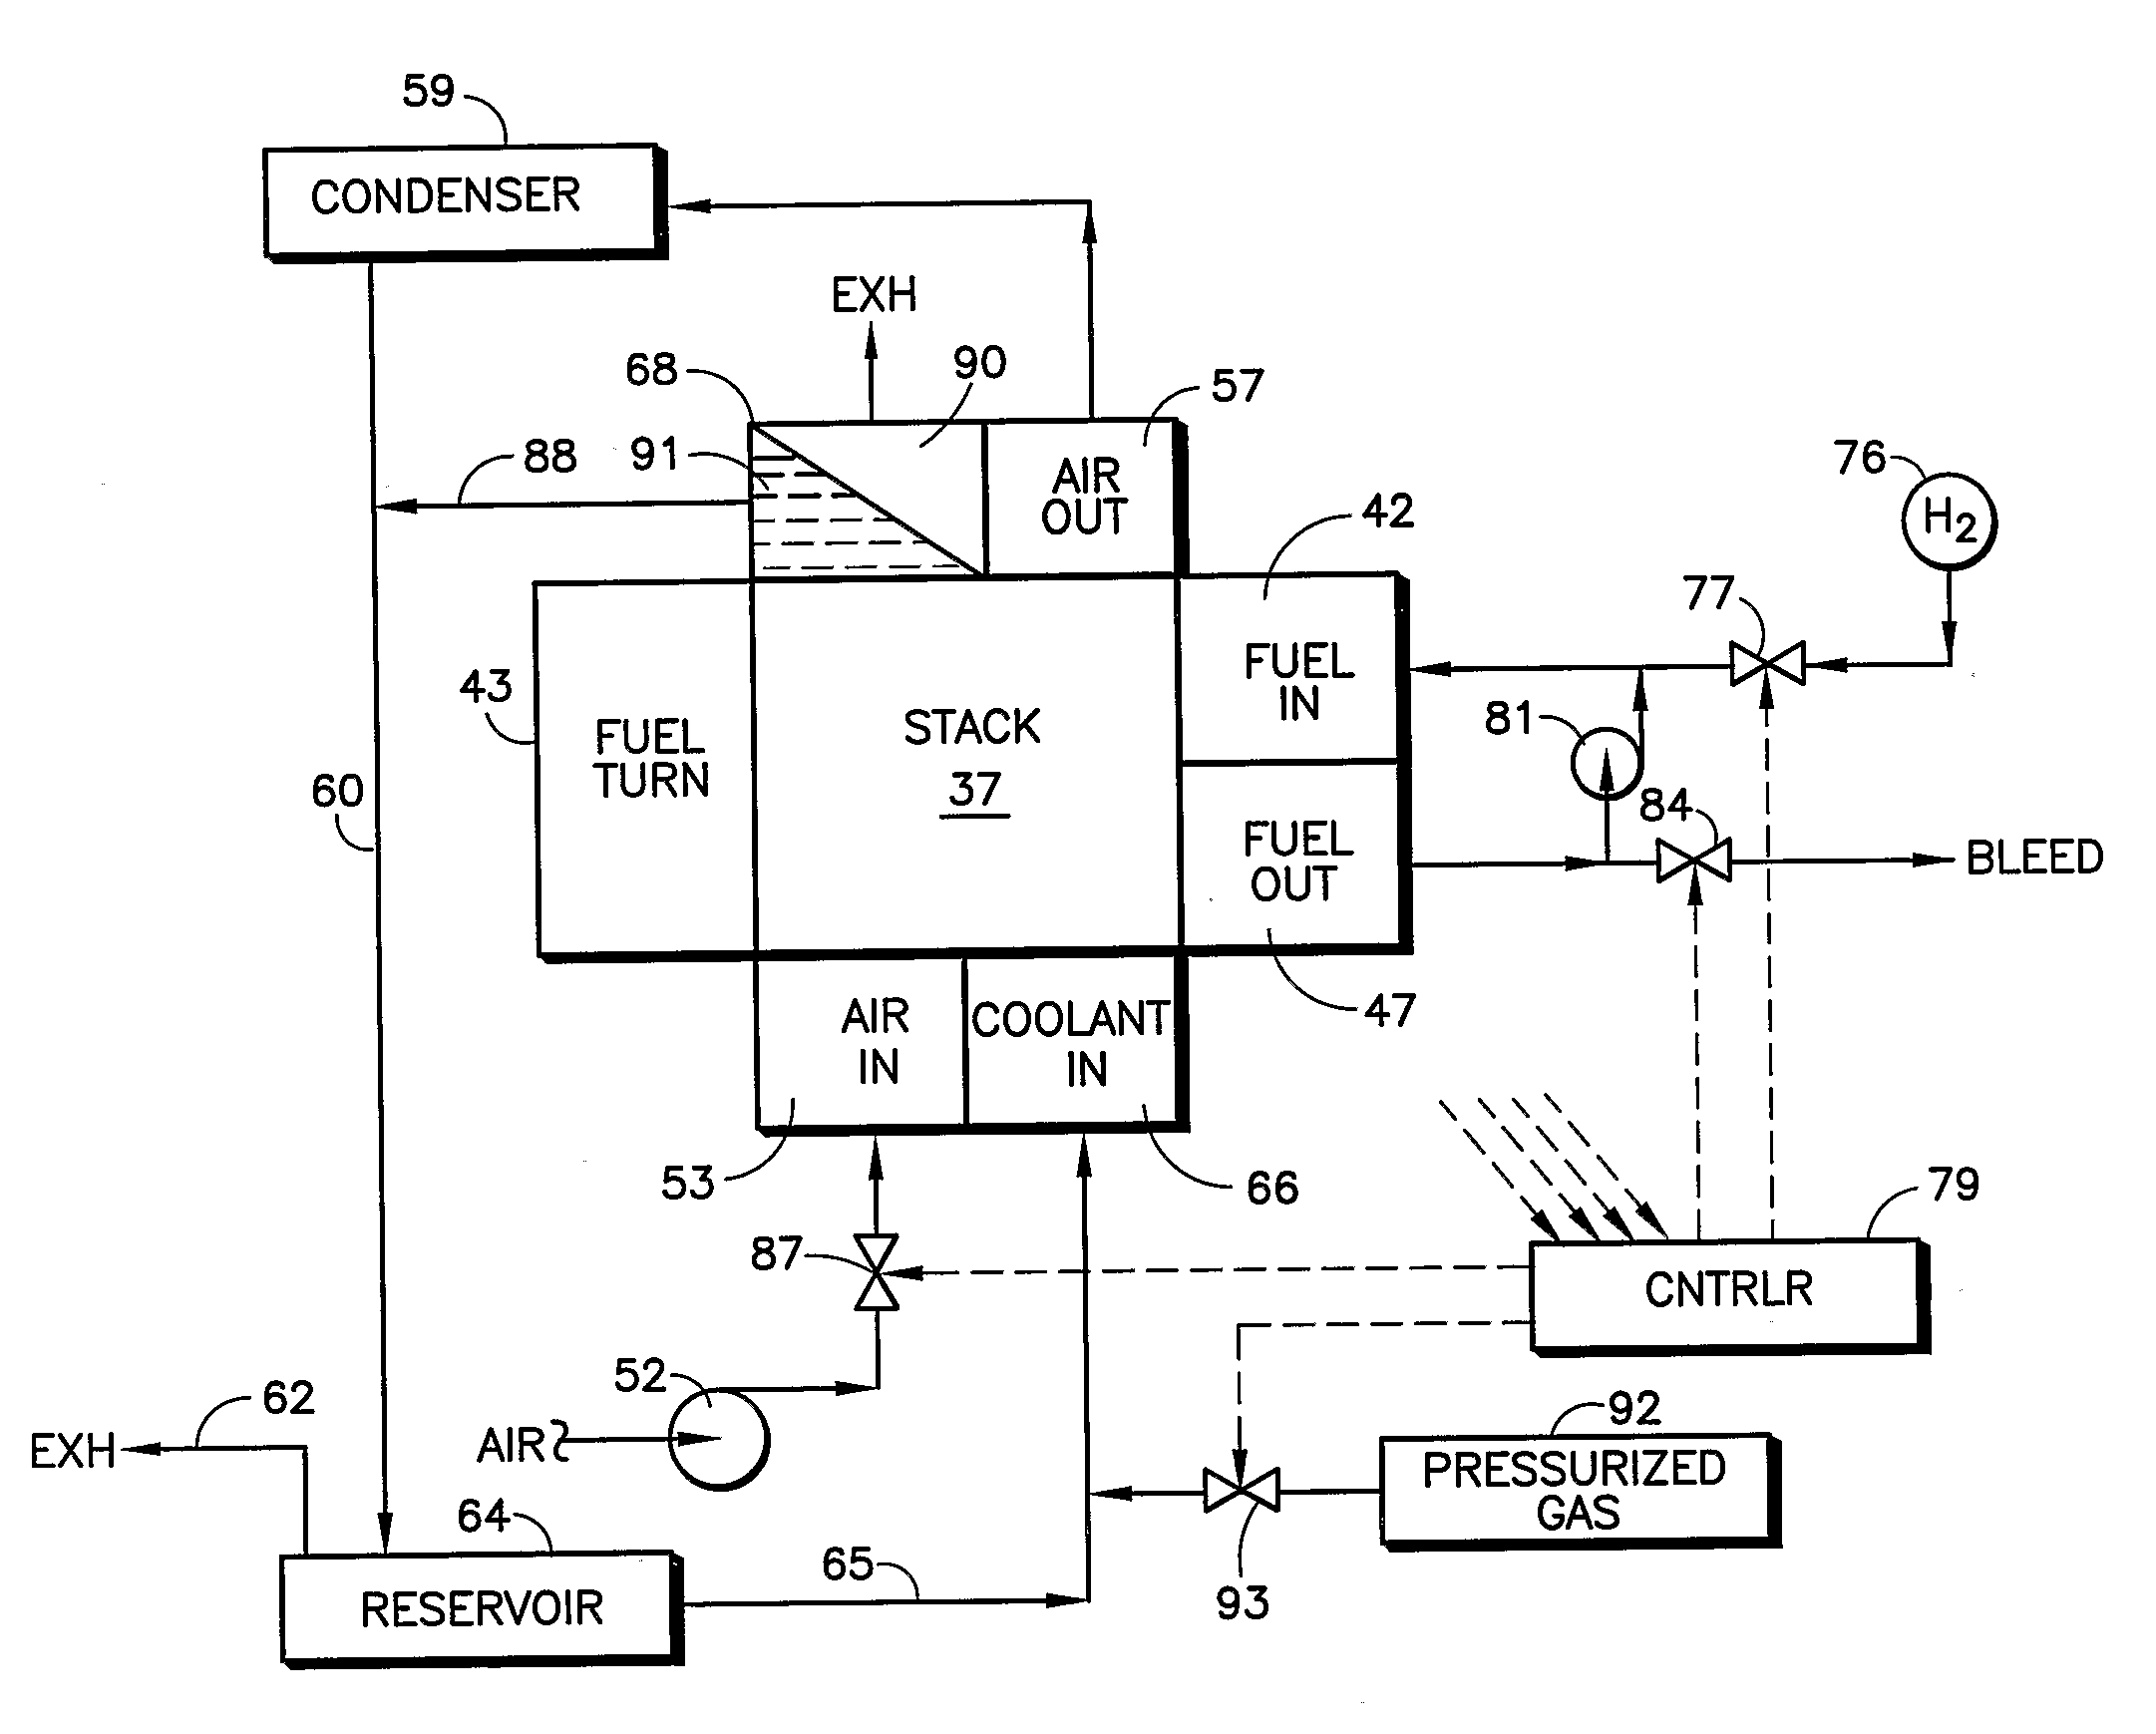 Circulation of Gas-Entrained Fuel Cell Coolant